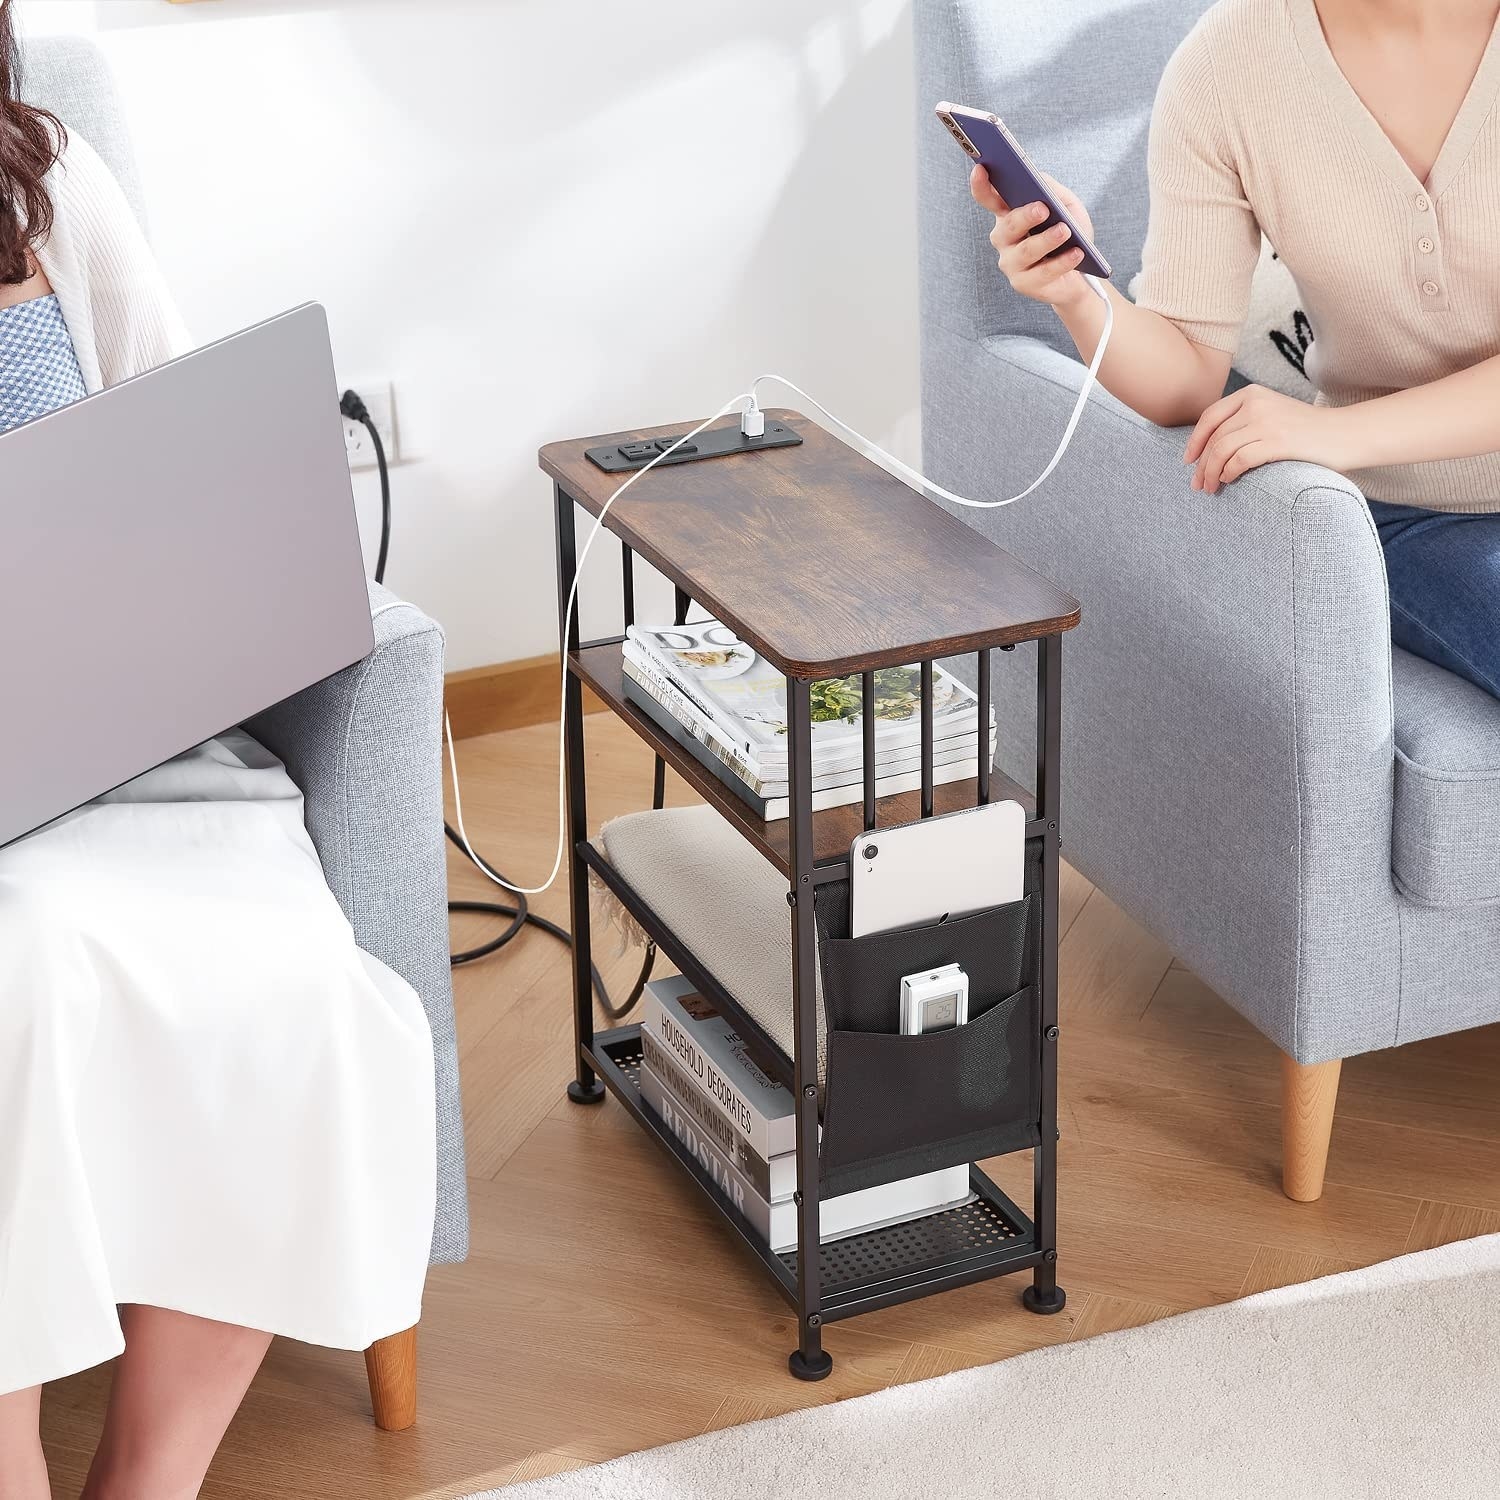 two people with devices plugged into the side table while they work